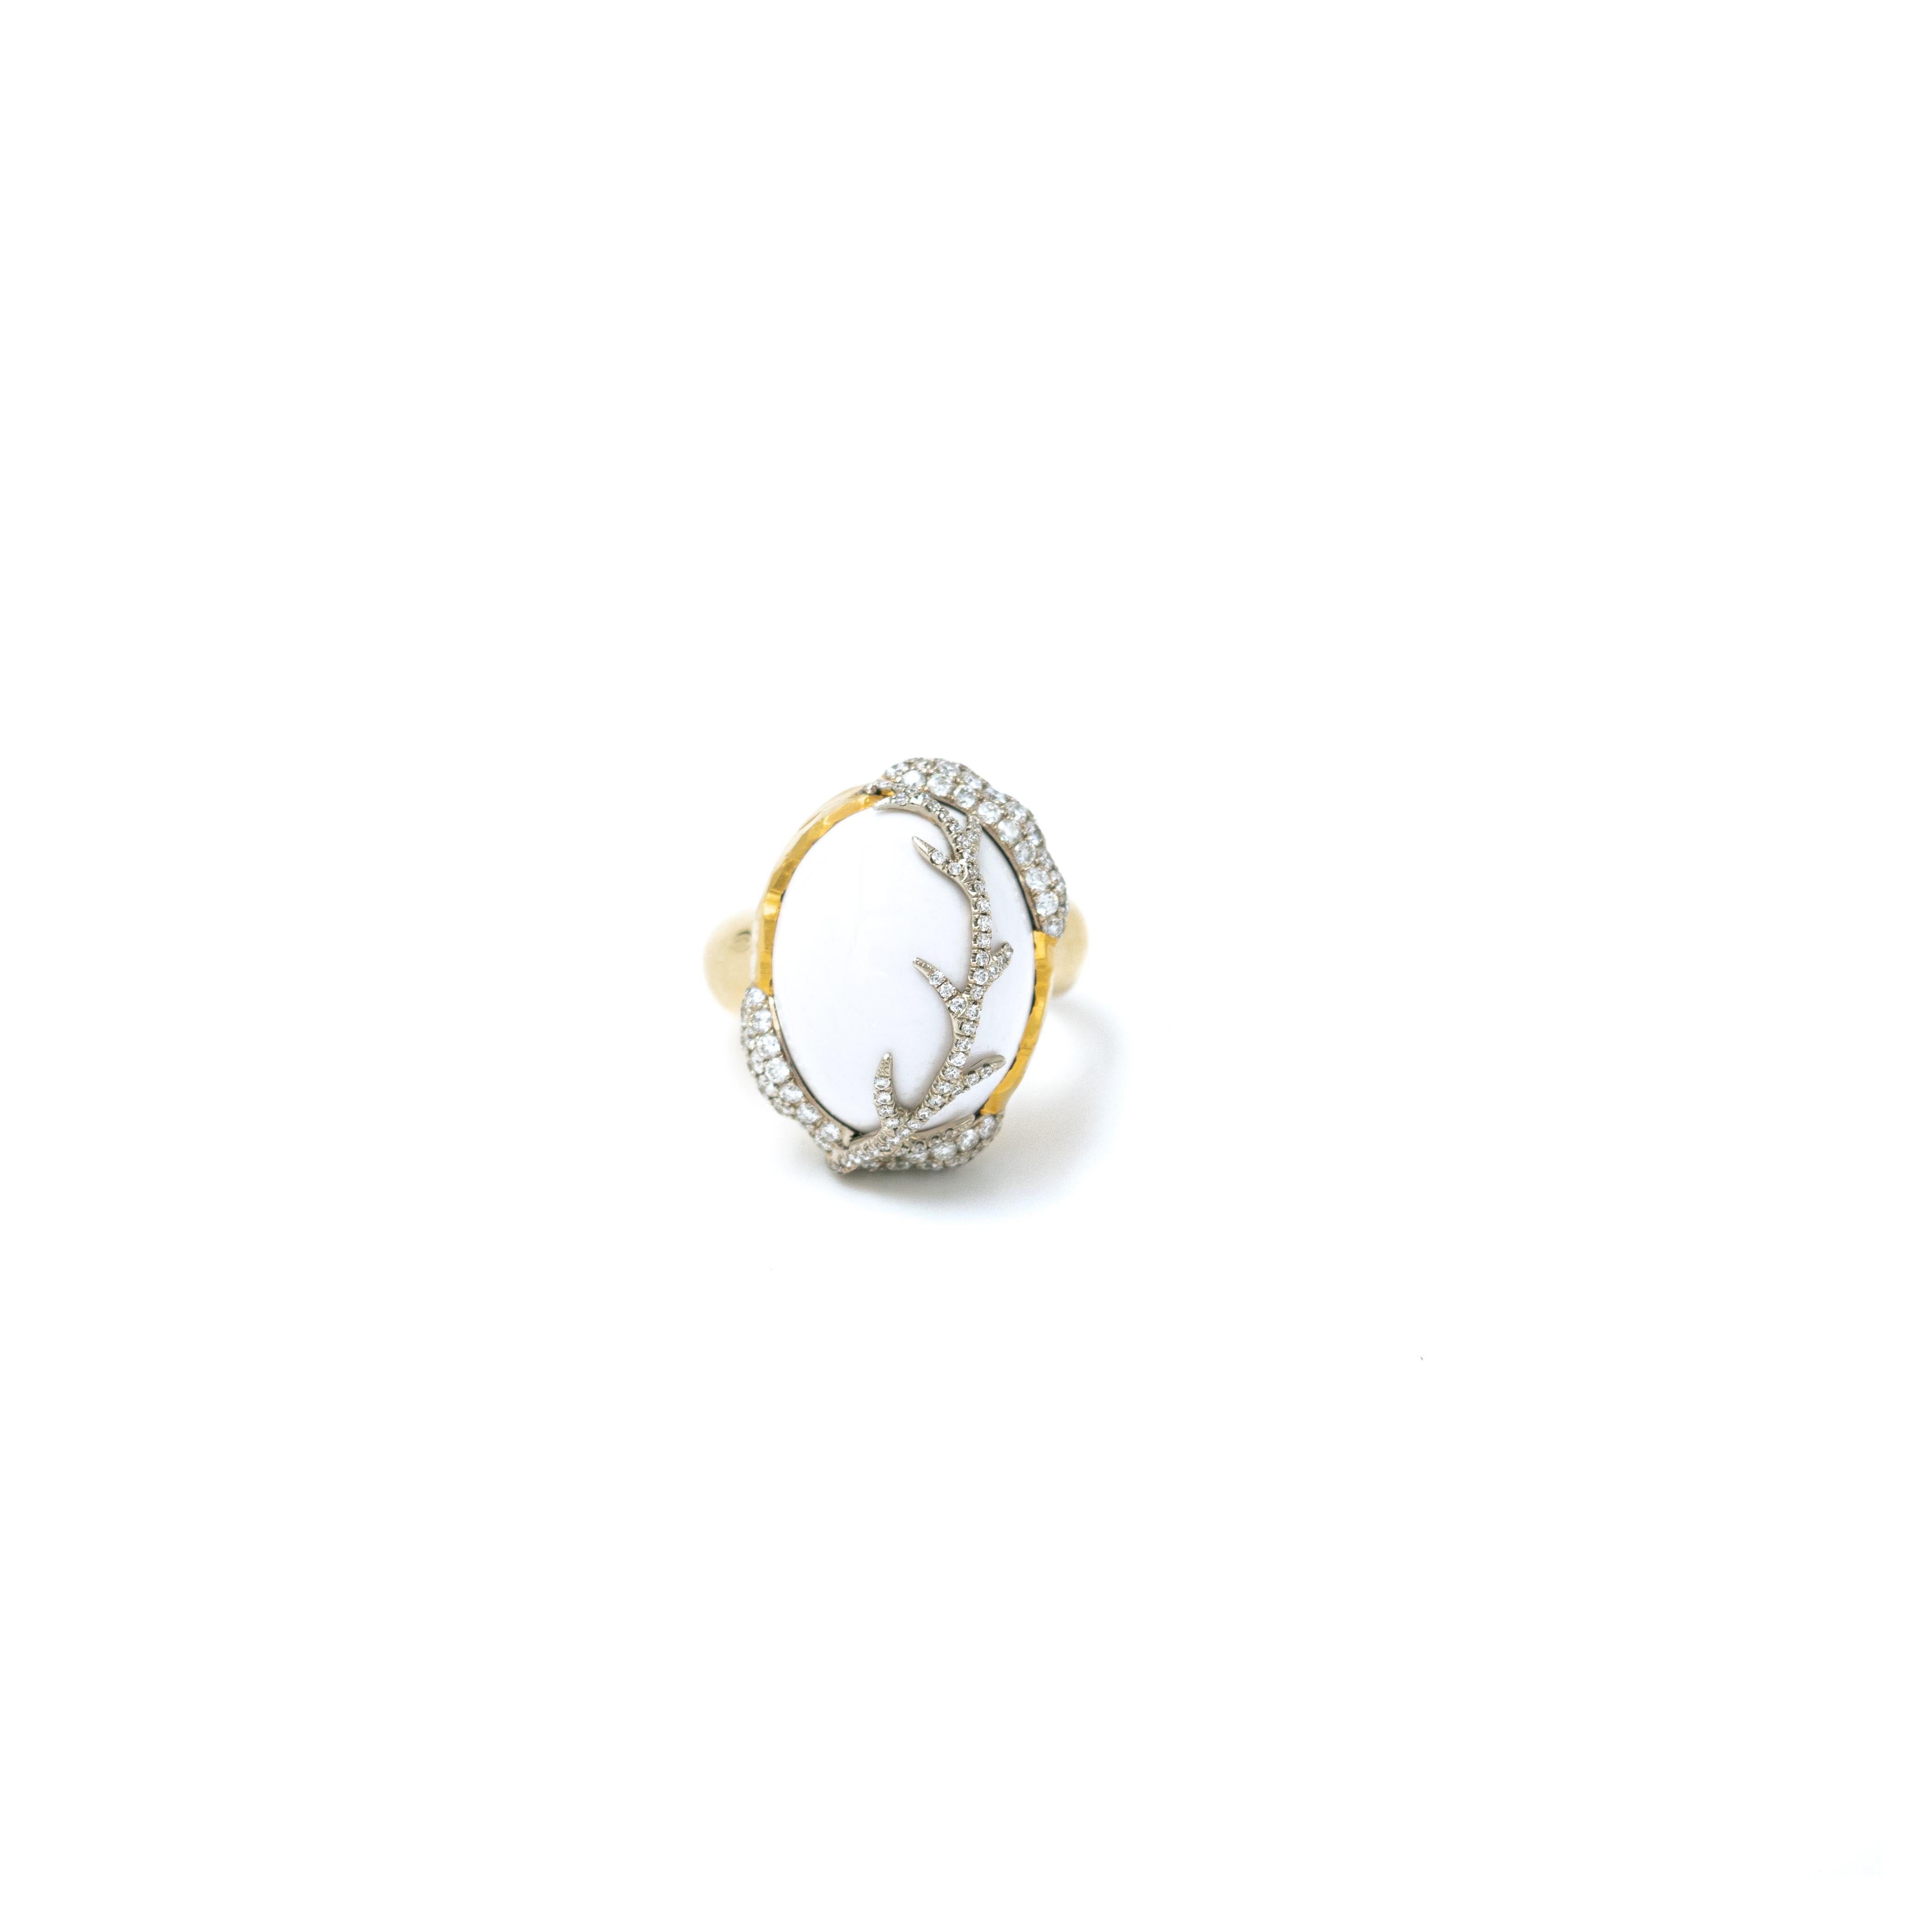 Inspired by the energy pulsating throughout nature, Velyan unites pure metals and gemstones into stunning styles that display the grandeur of fine jewelry.

This ring features white pavé diamonds and a stunning opal set in 18k and 24k yellow